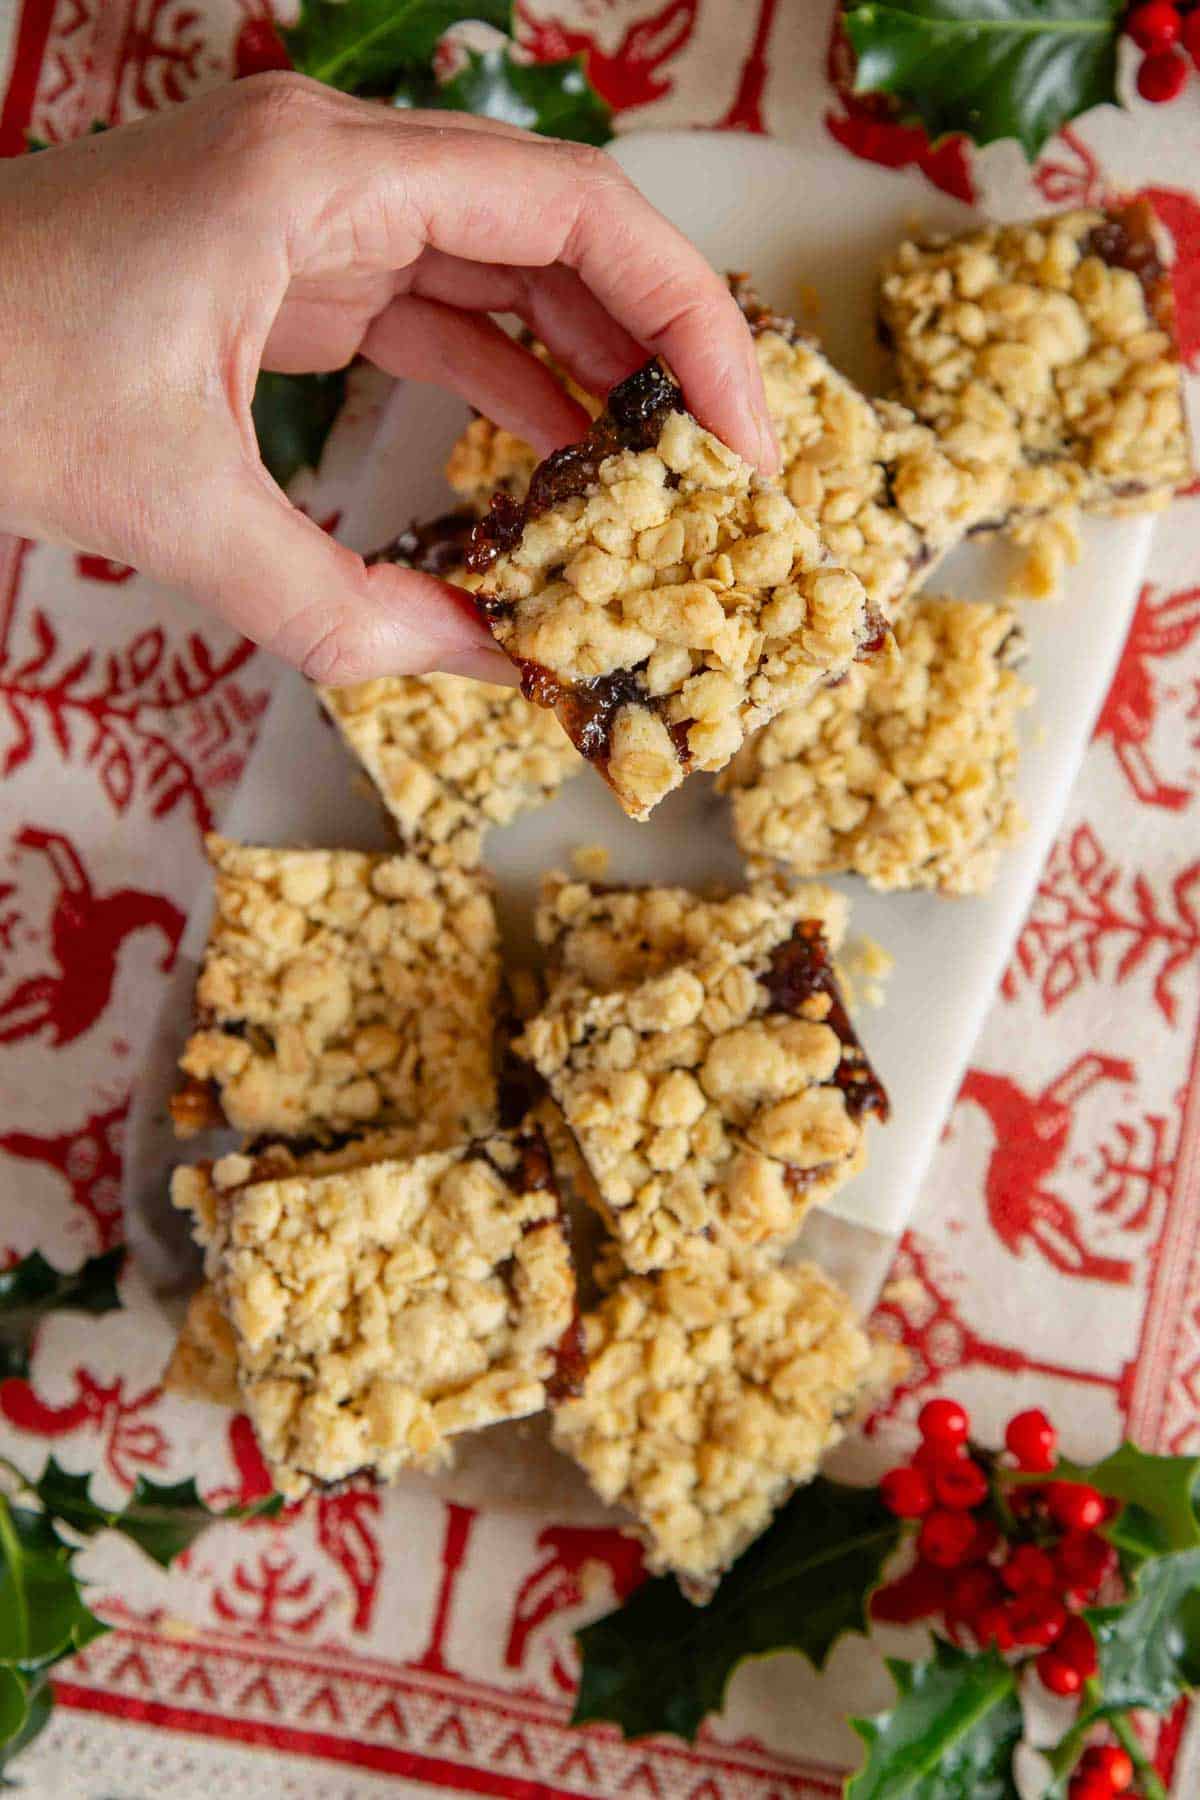 Taking a mincemeat crumble bar from a festive display.